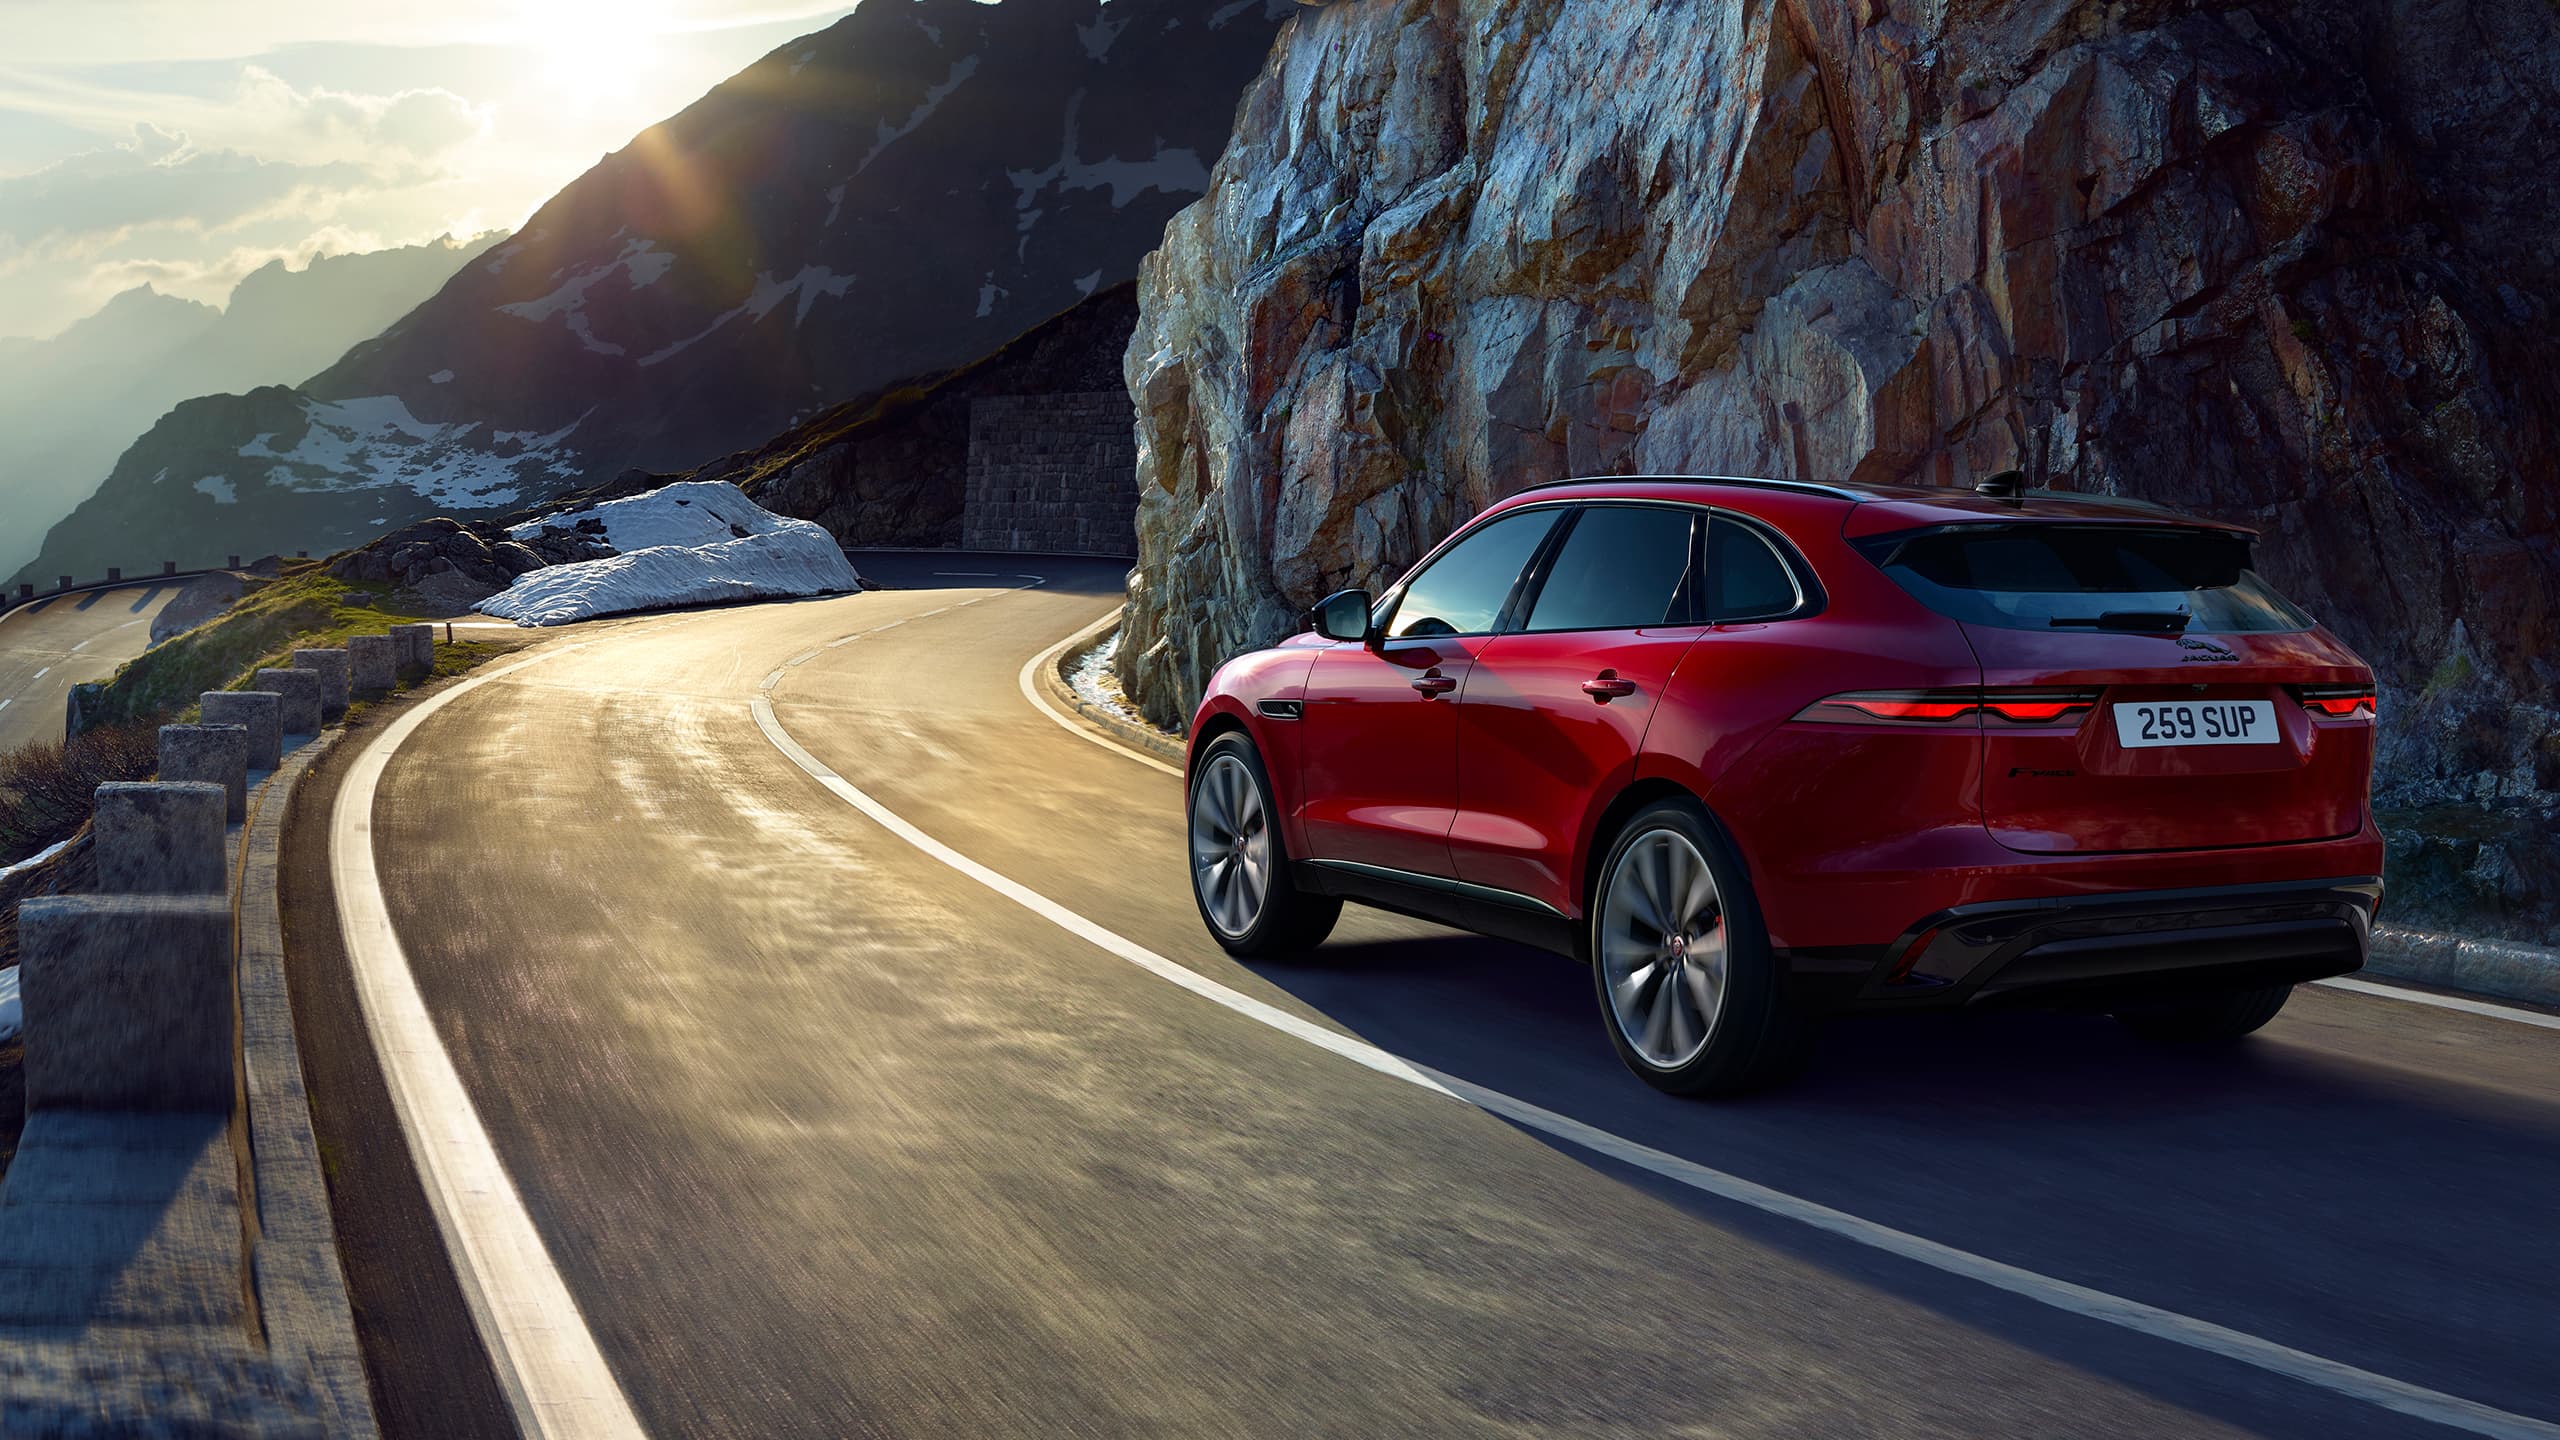 Jaguar F-PACE running on mountain hill road